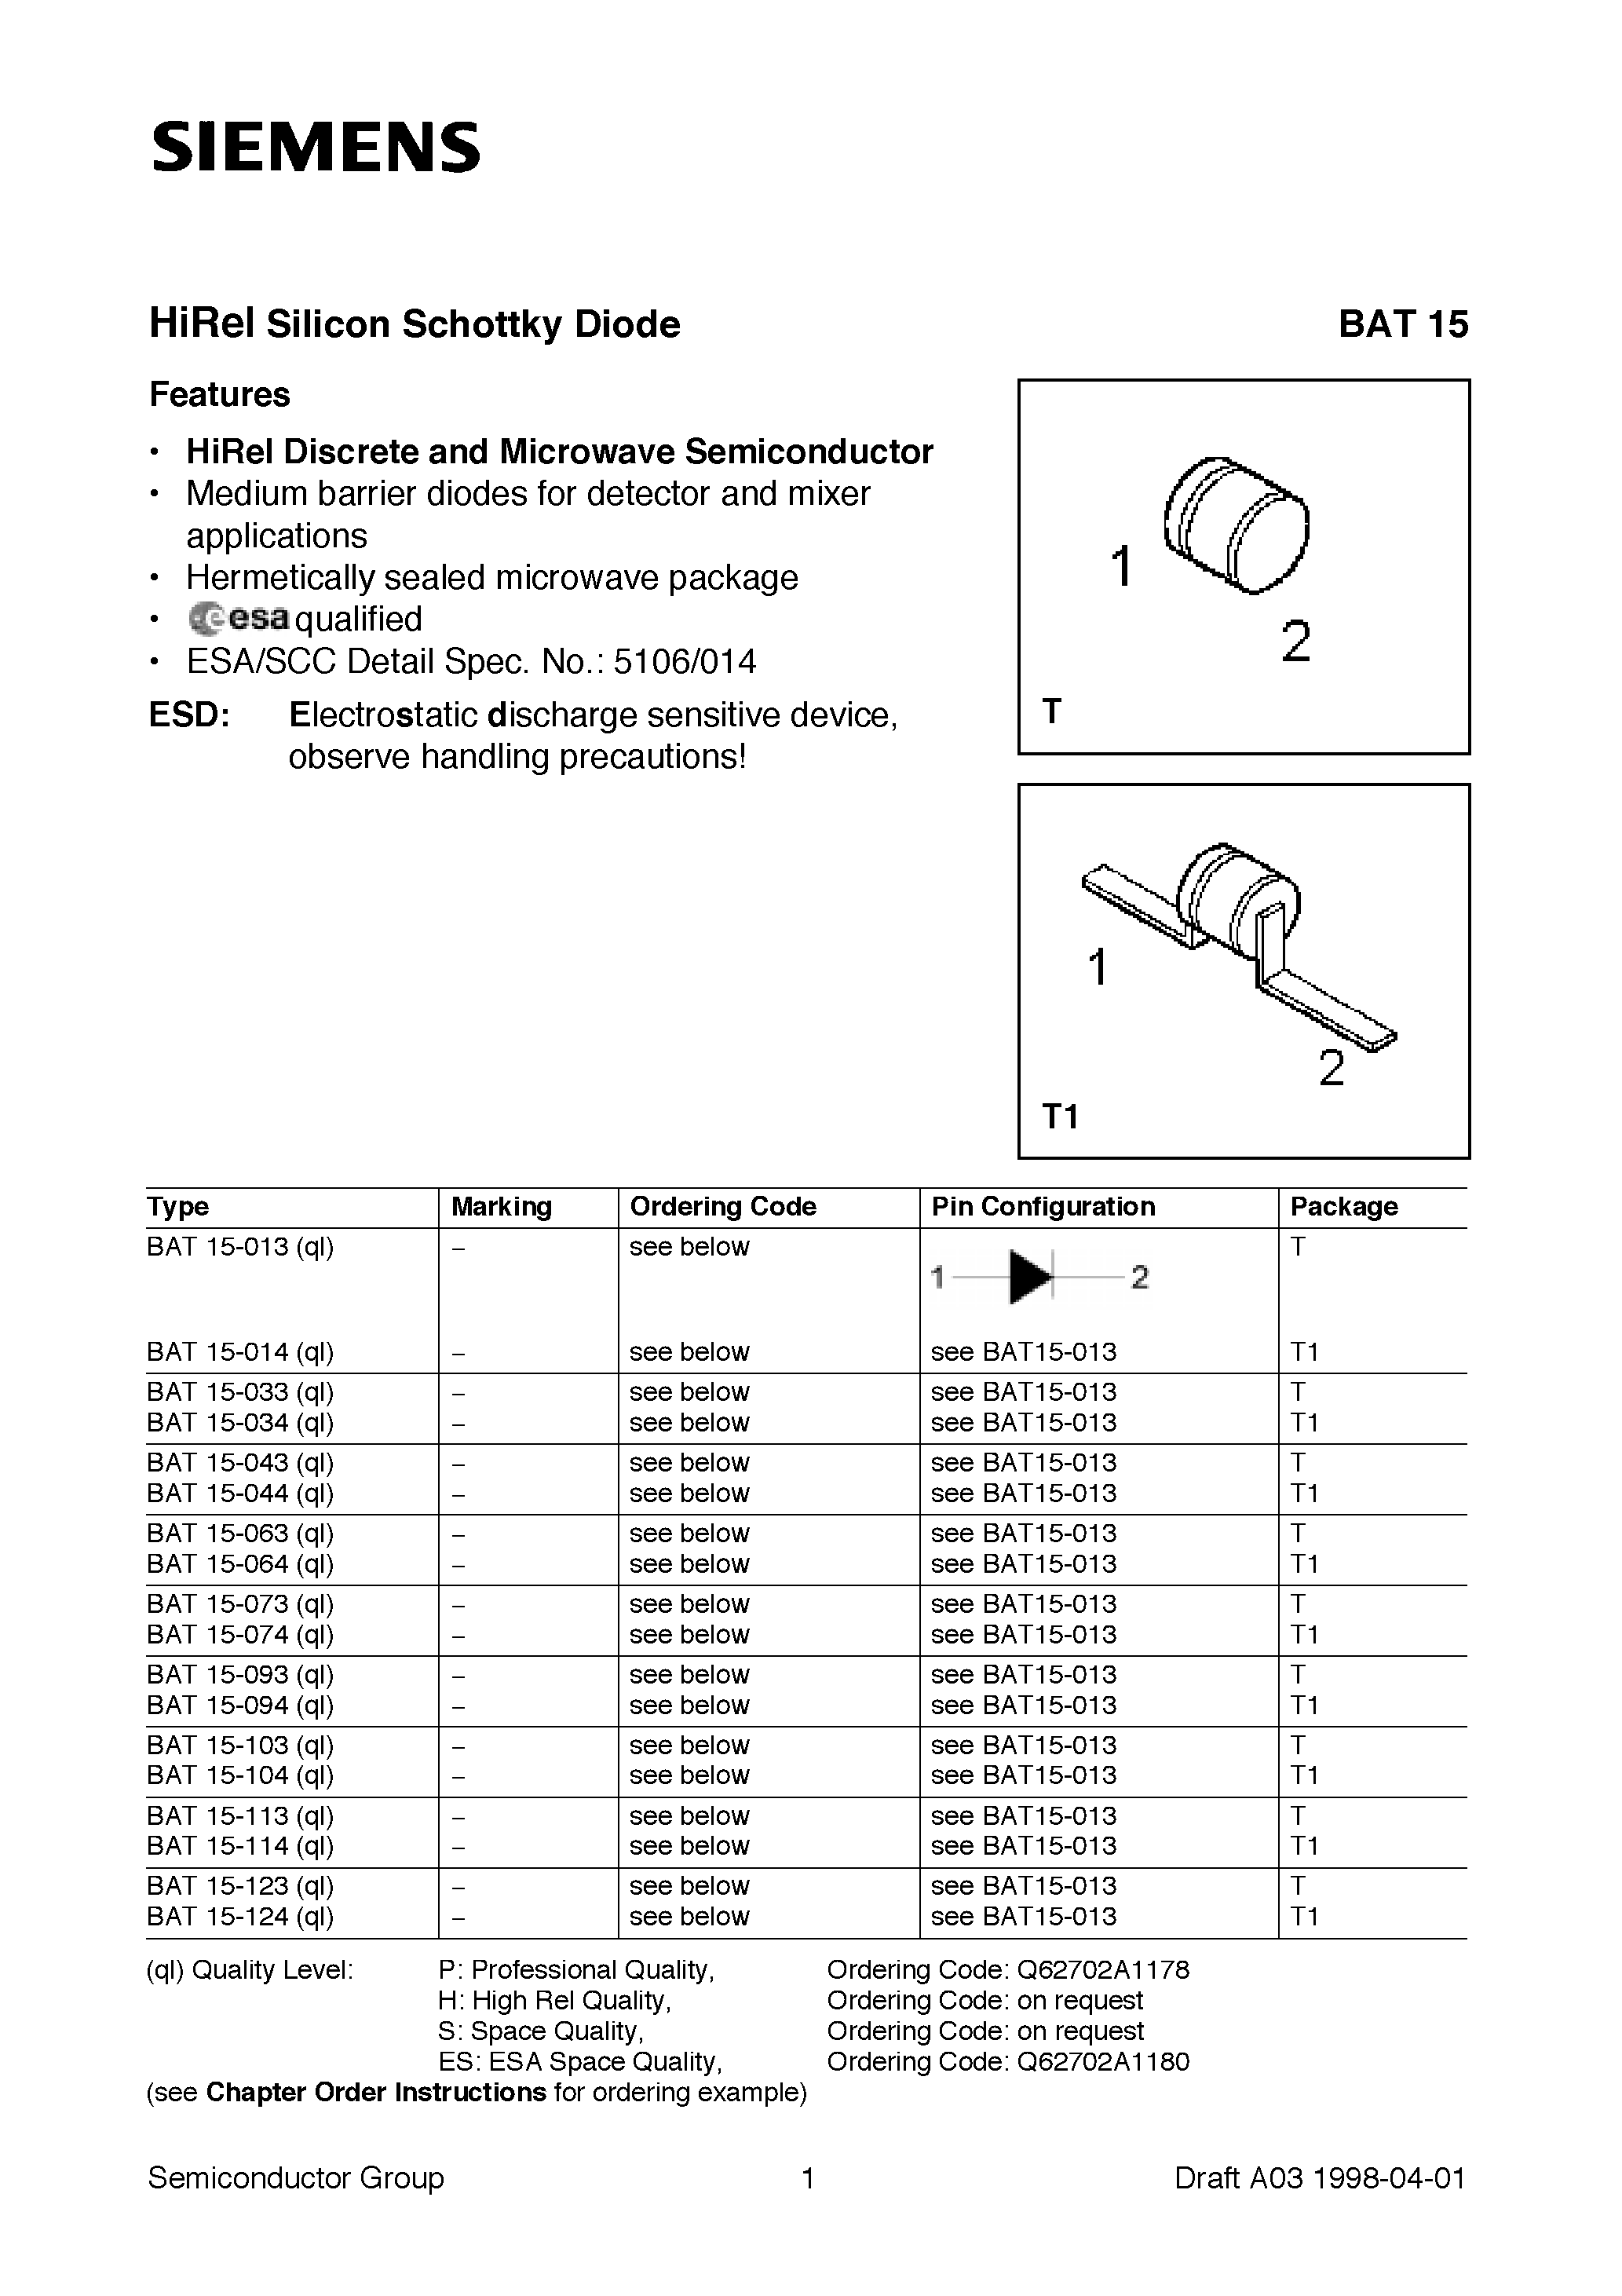 Datasheet BAT15-113 - HiRel Silicon Schottky Diode (HiRel Discrete and Microwave Semiconductor Medium barrier diodes for detector and mixer applications) page 1